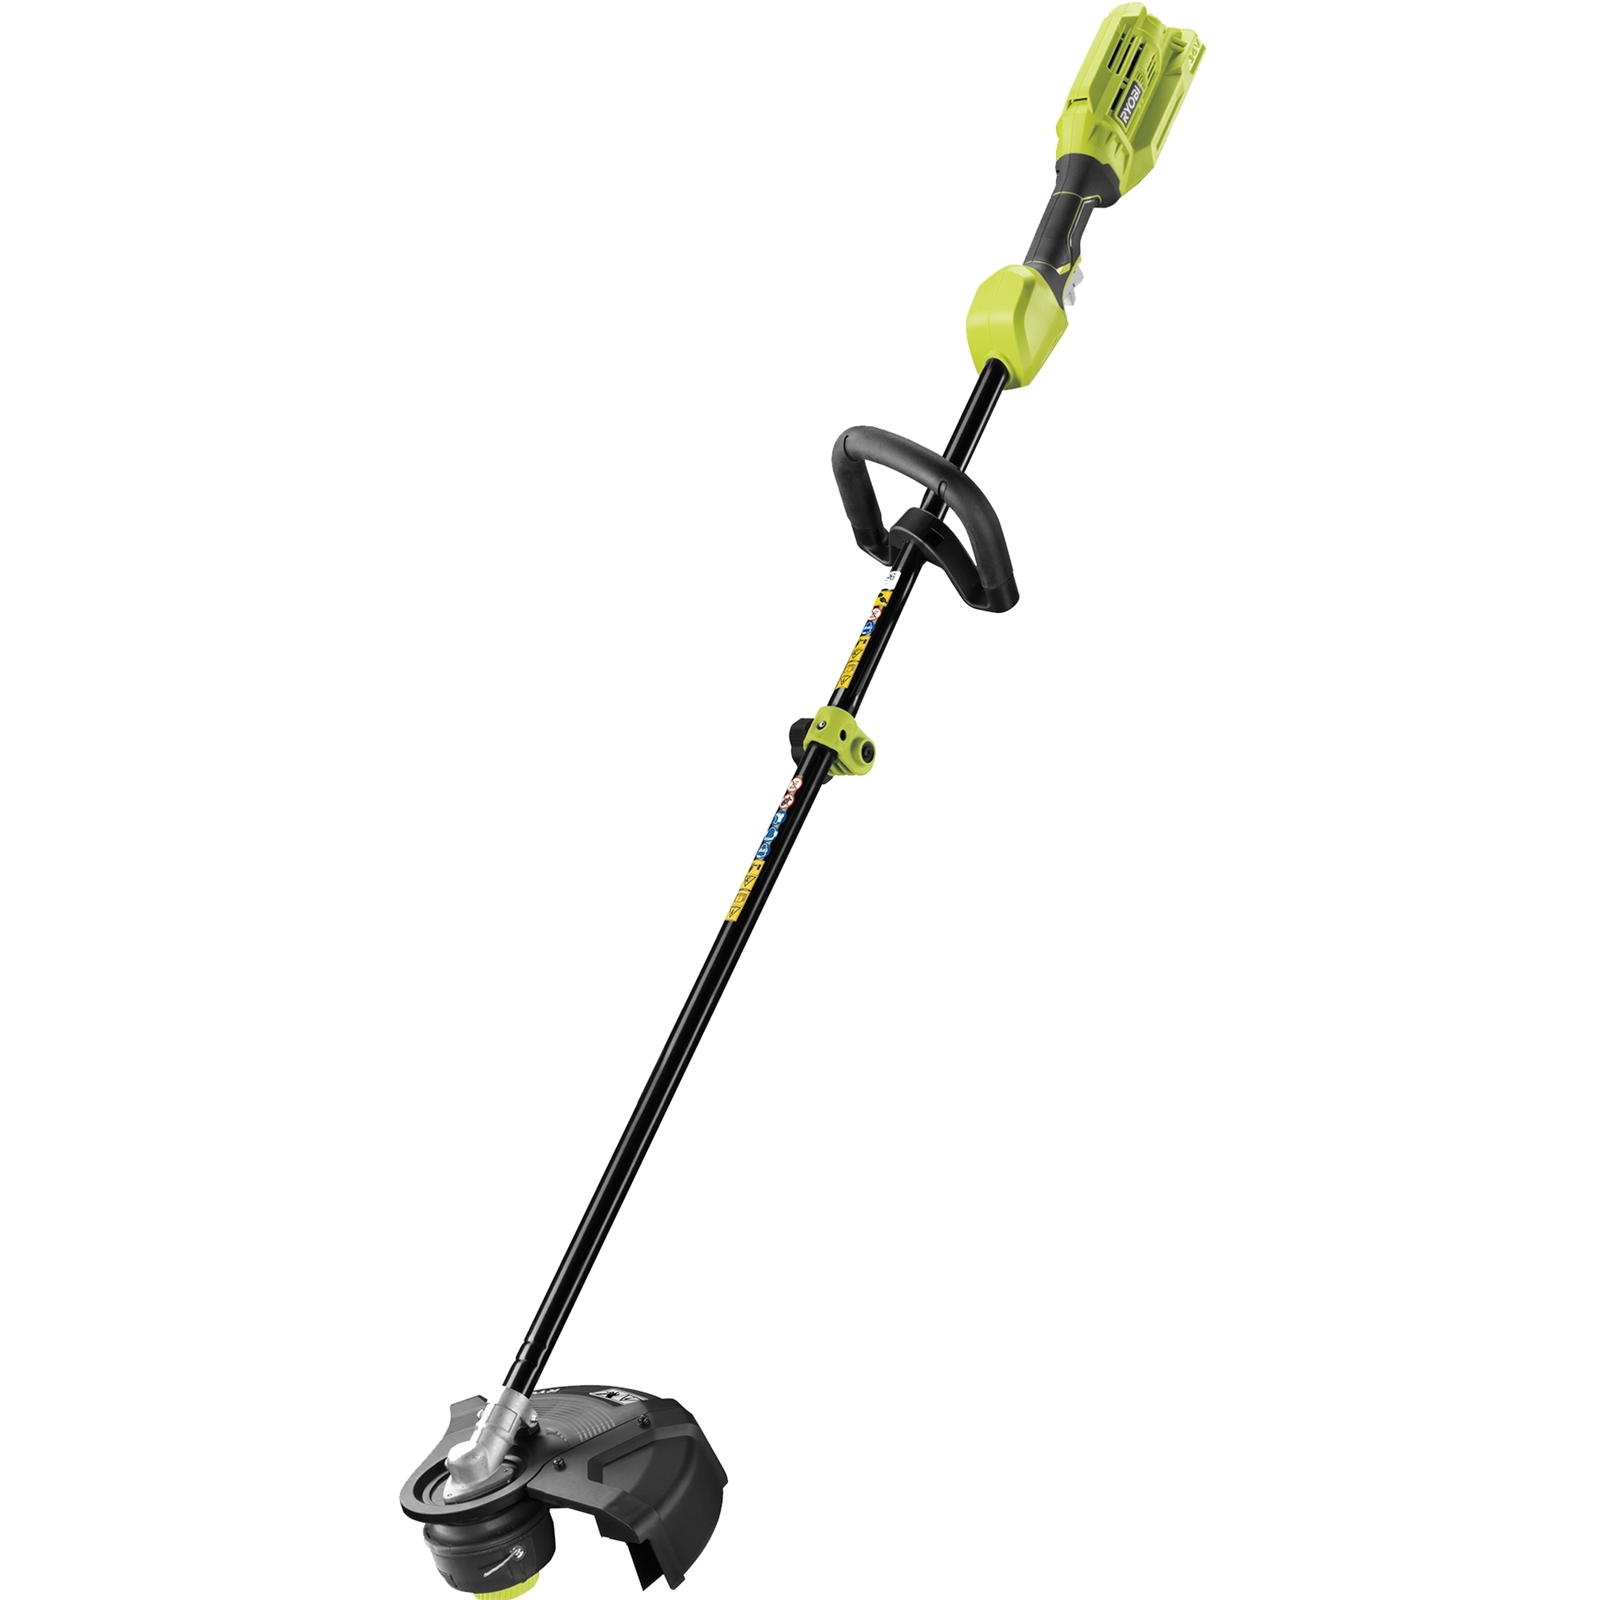 flymo electric strimmer